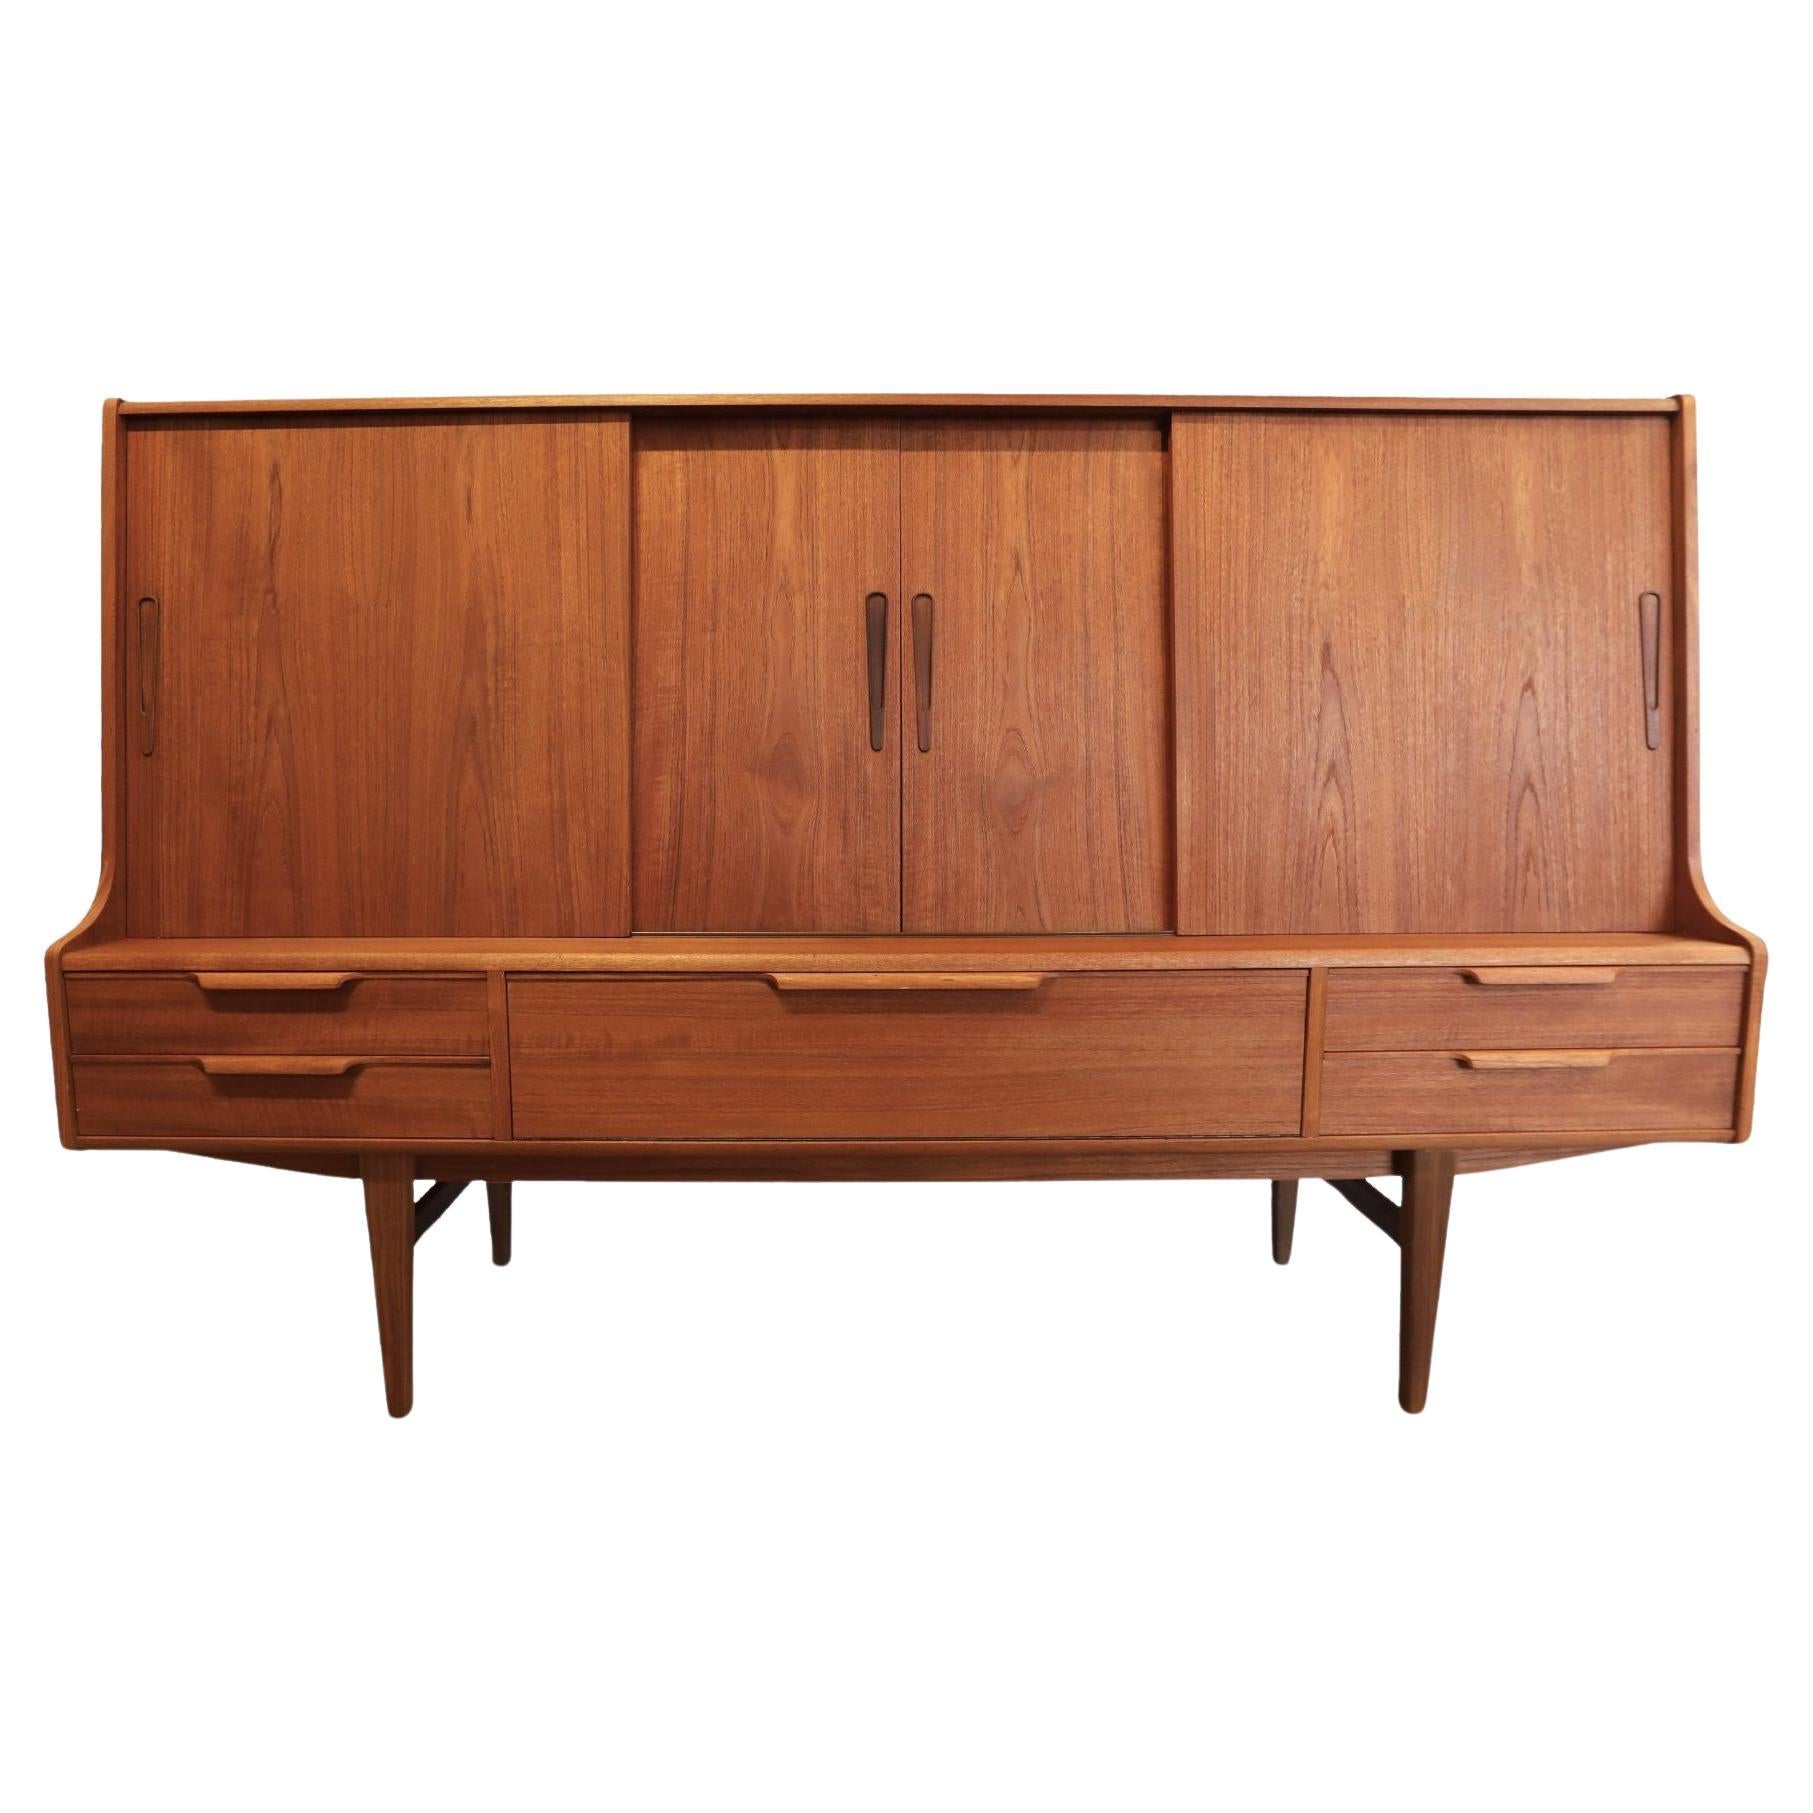 Cabinet in Teak with Sliding Doors and Bar Cabinet from Silkeborg, 1960s